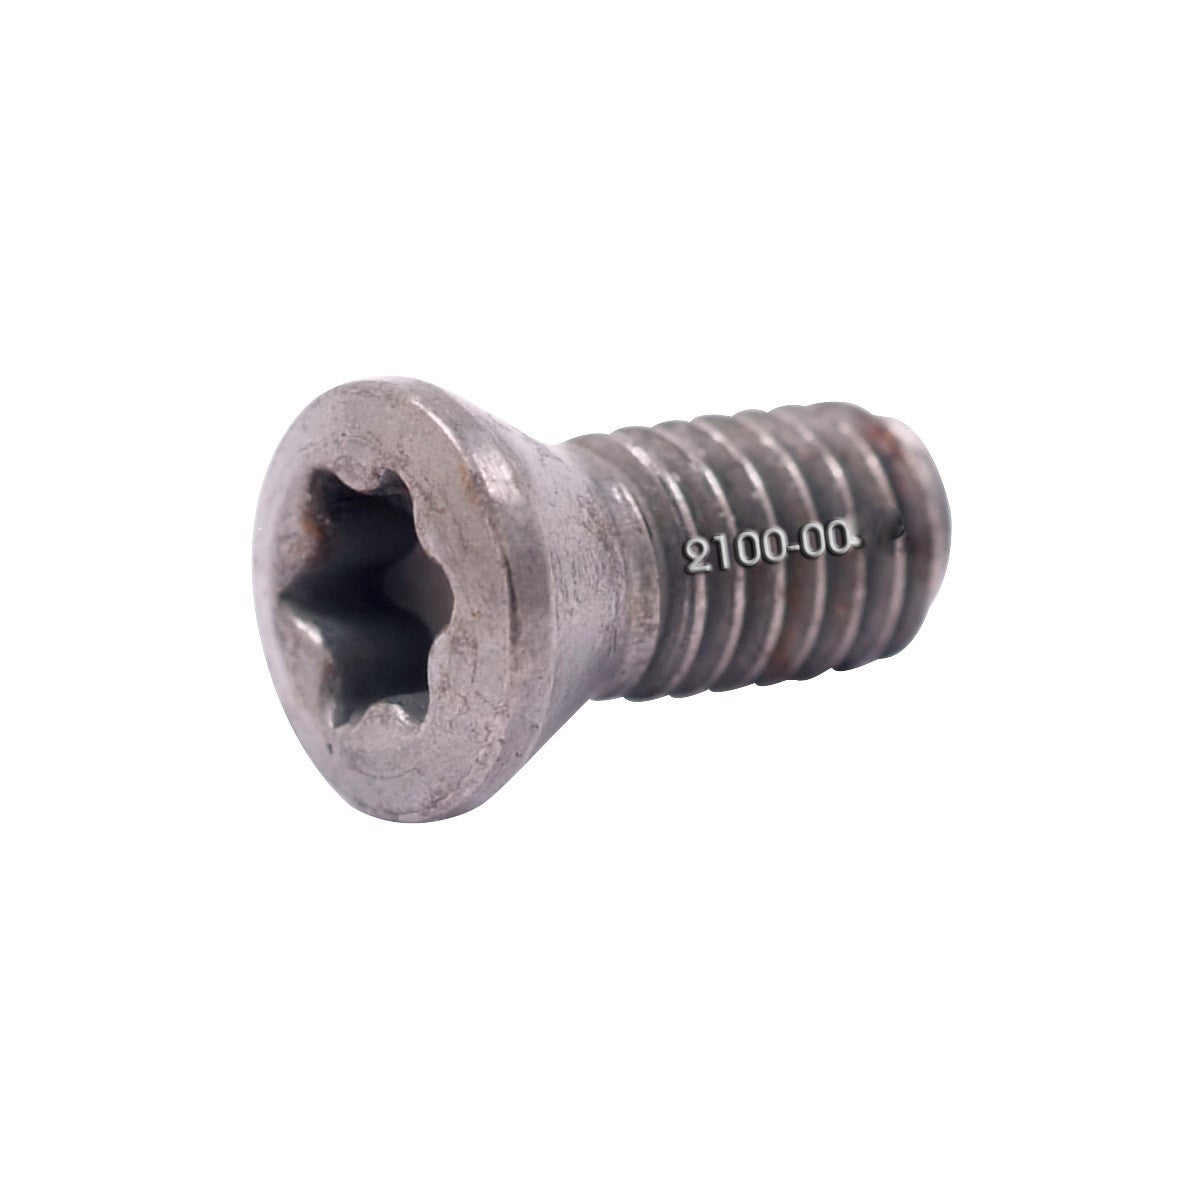 M3.5 X 12MM OVERALL LENGTH SCREW